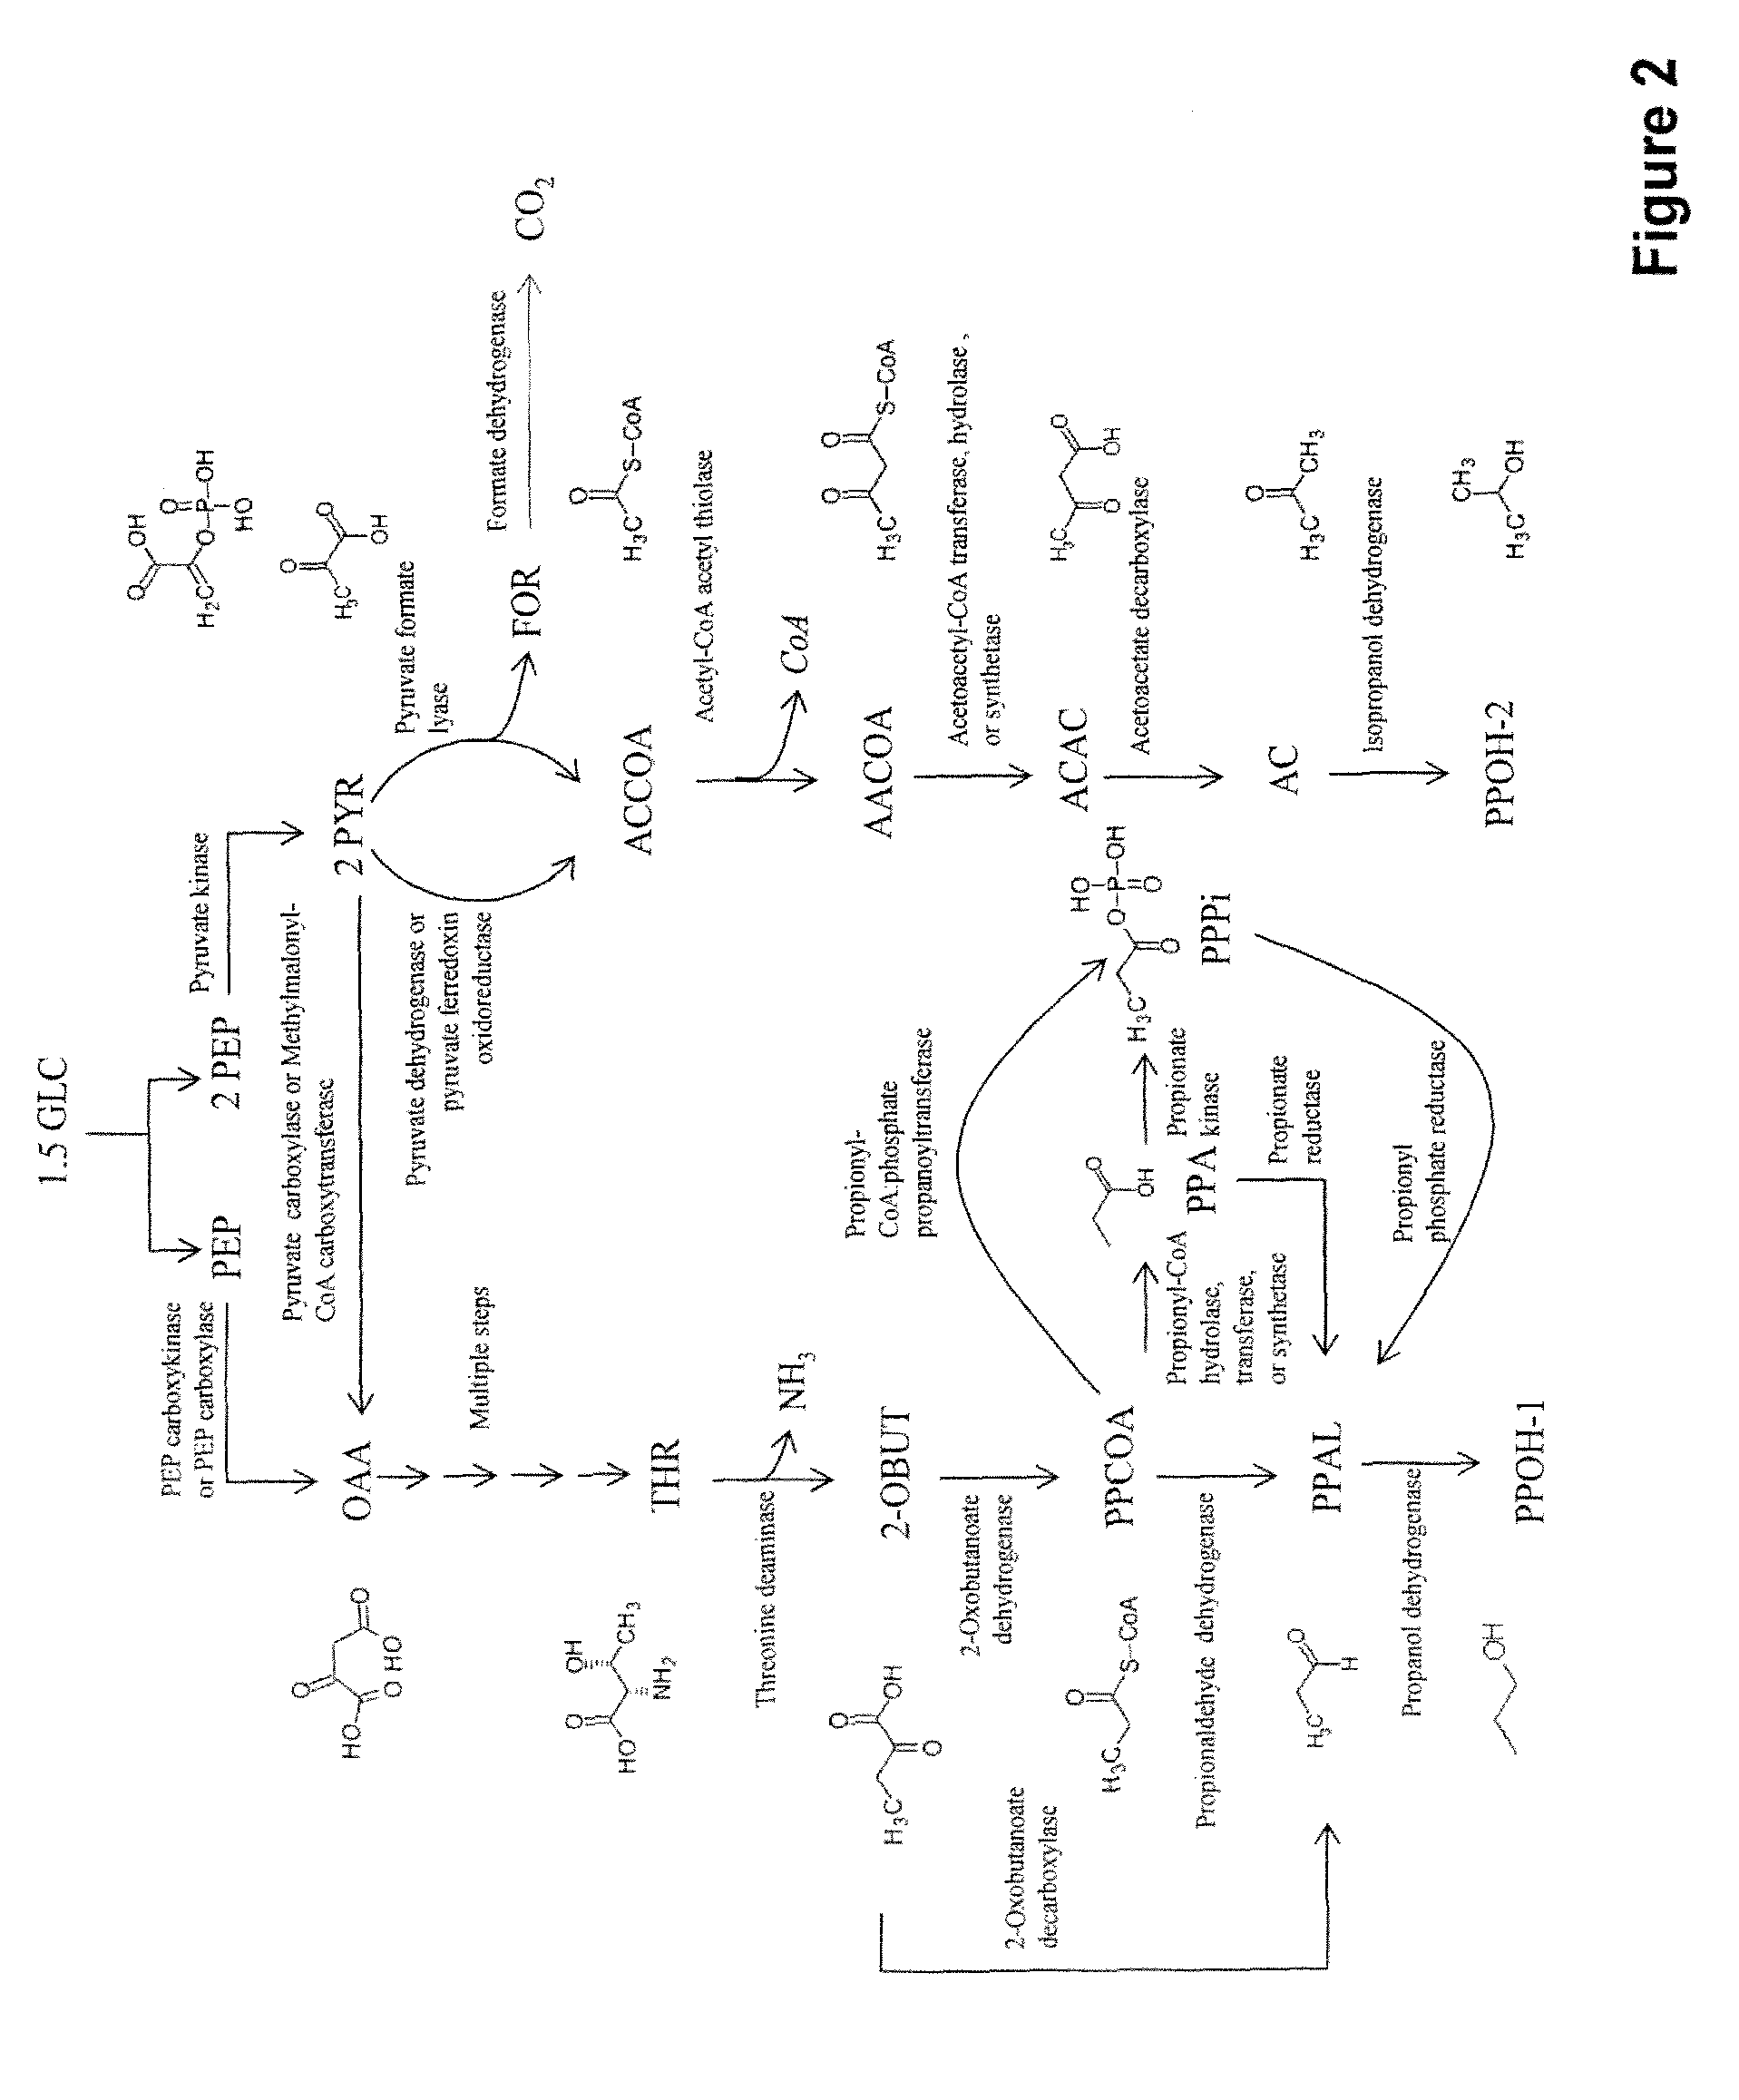 Microorganisms and methods for the co-production of isopropanol and 1,4-butanediol